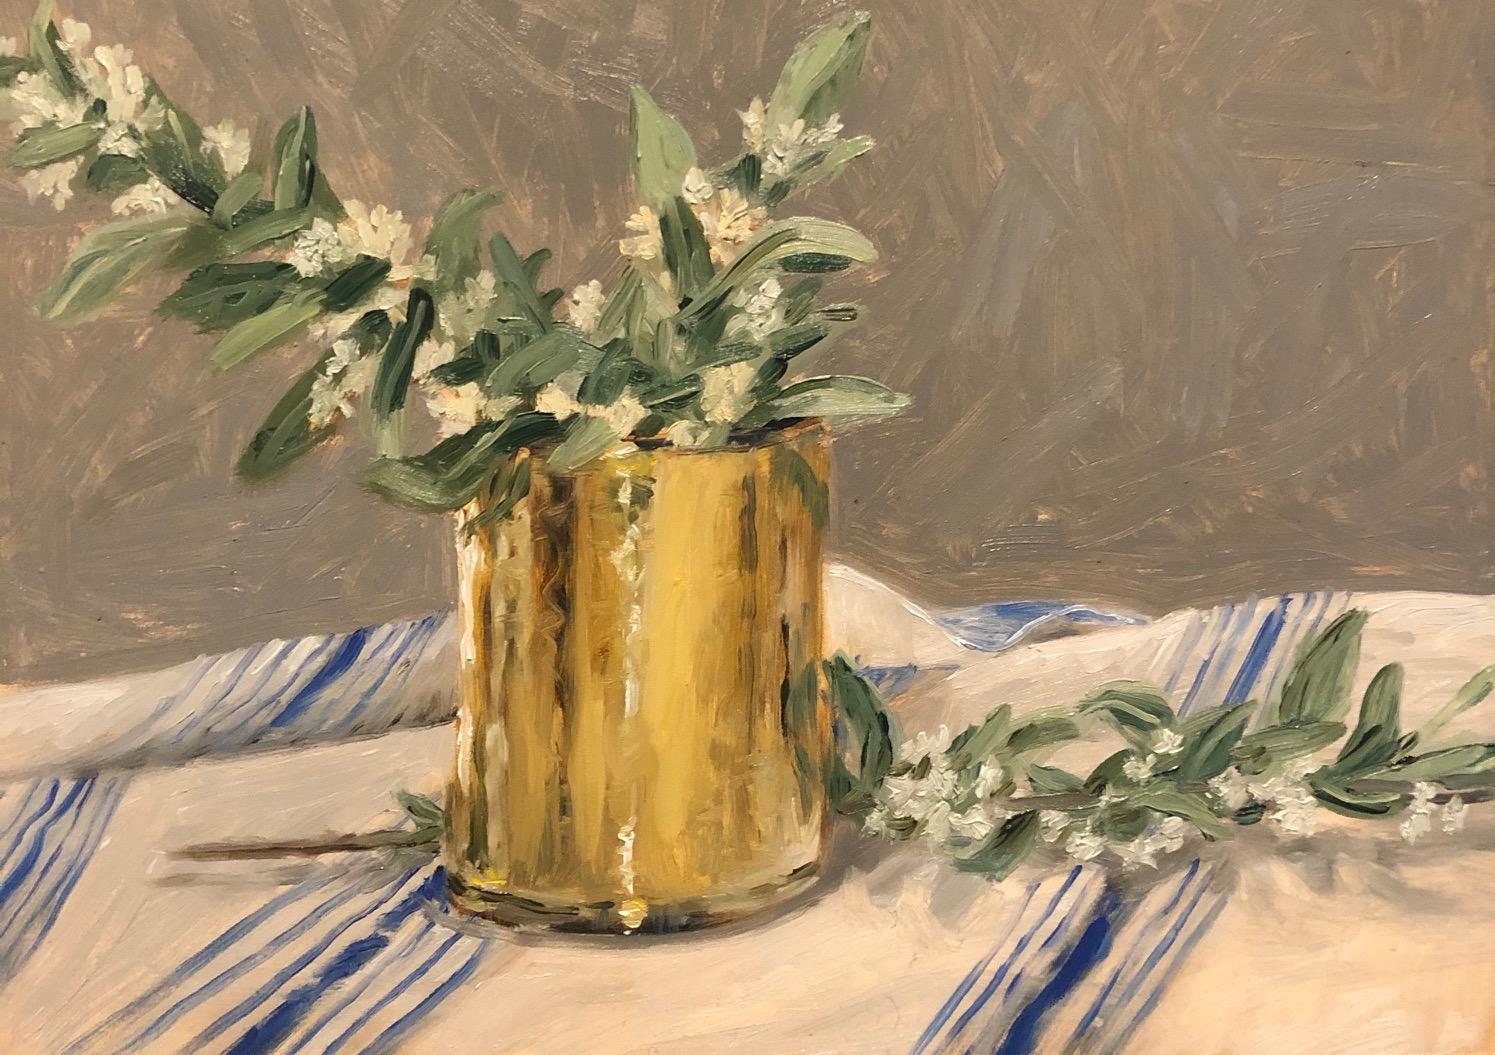 'Early Spring' is a small framed representational oil on canvas still life painting created by American artist Ginny Williams in 2020. Featuring a palette made of blue, neutrals and white, accented by brown colors, the painting depicts a golden vase